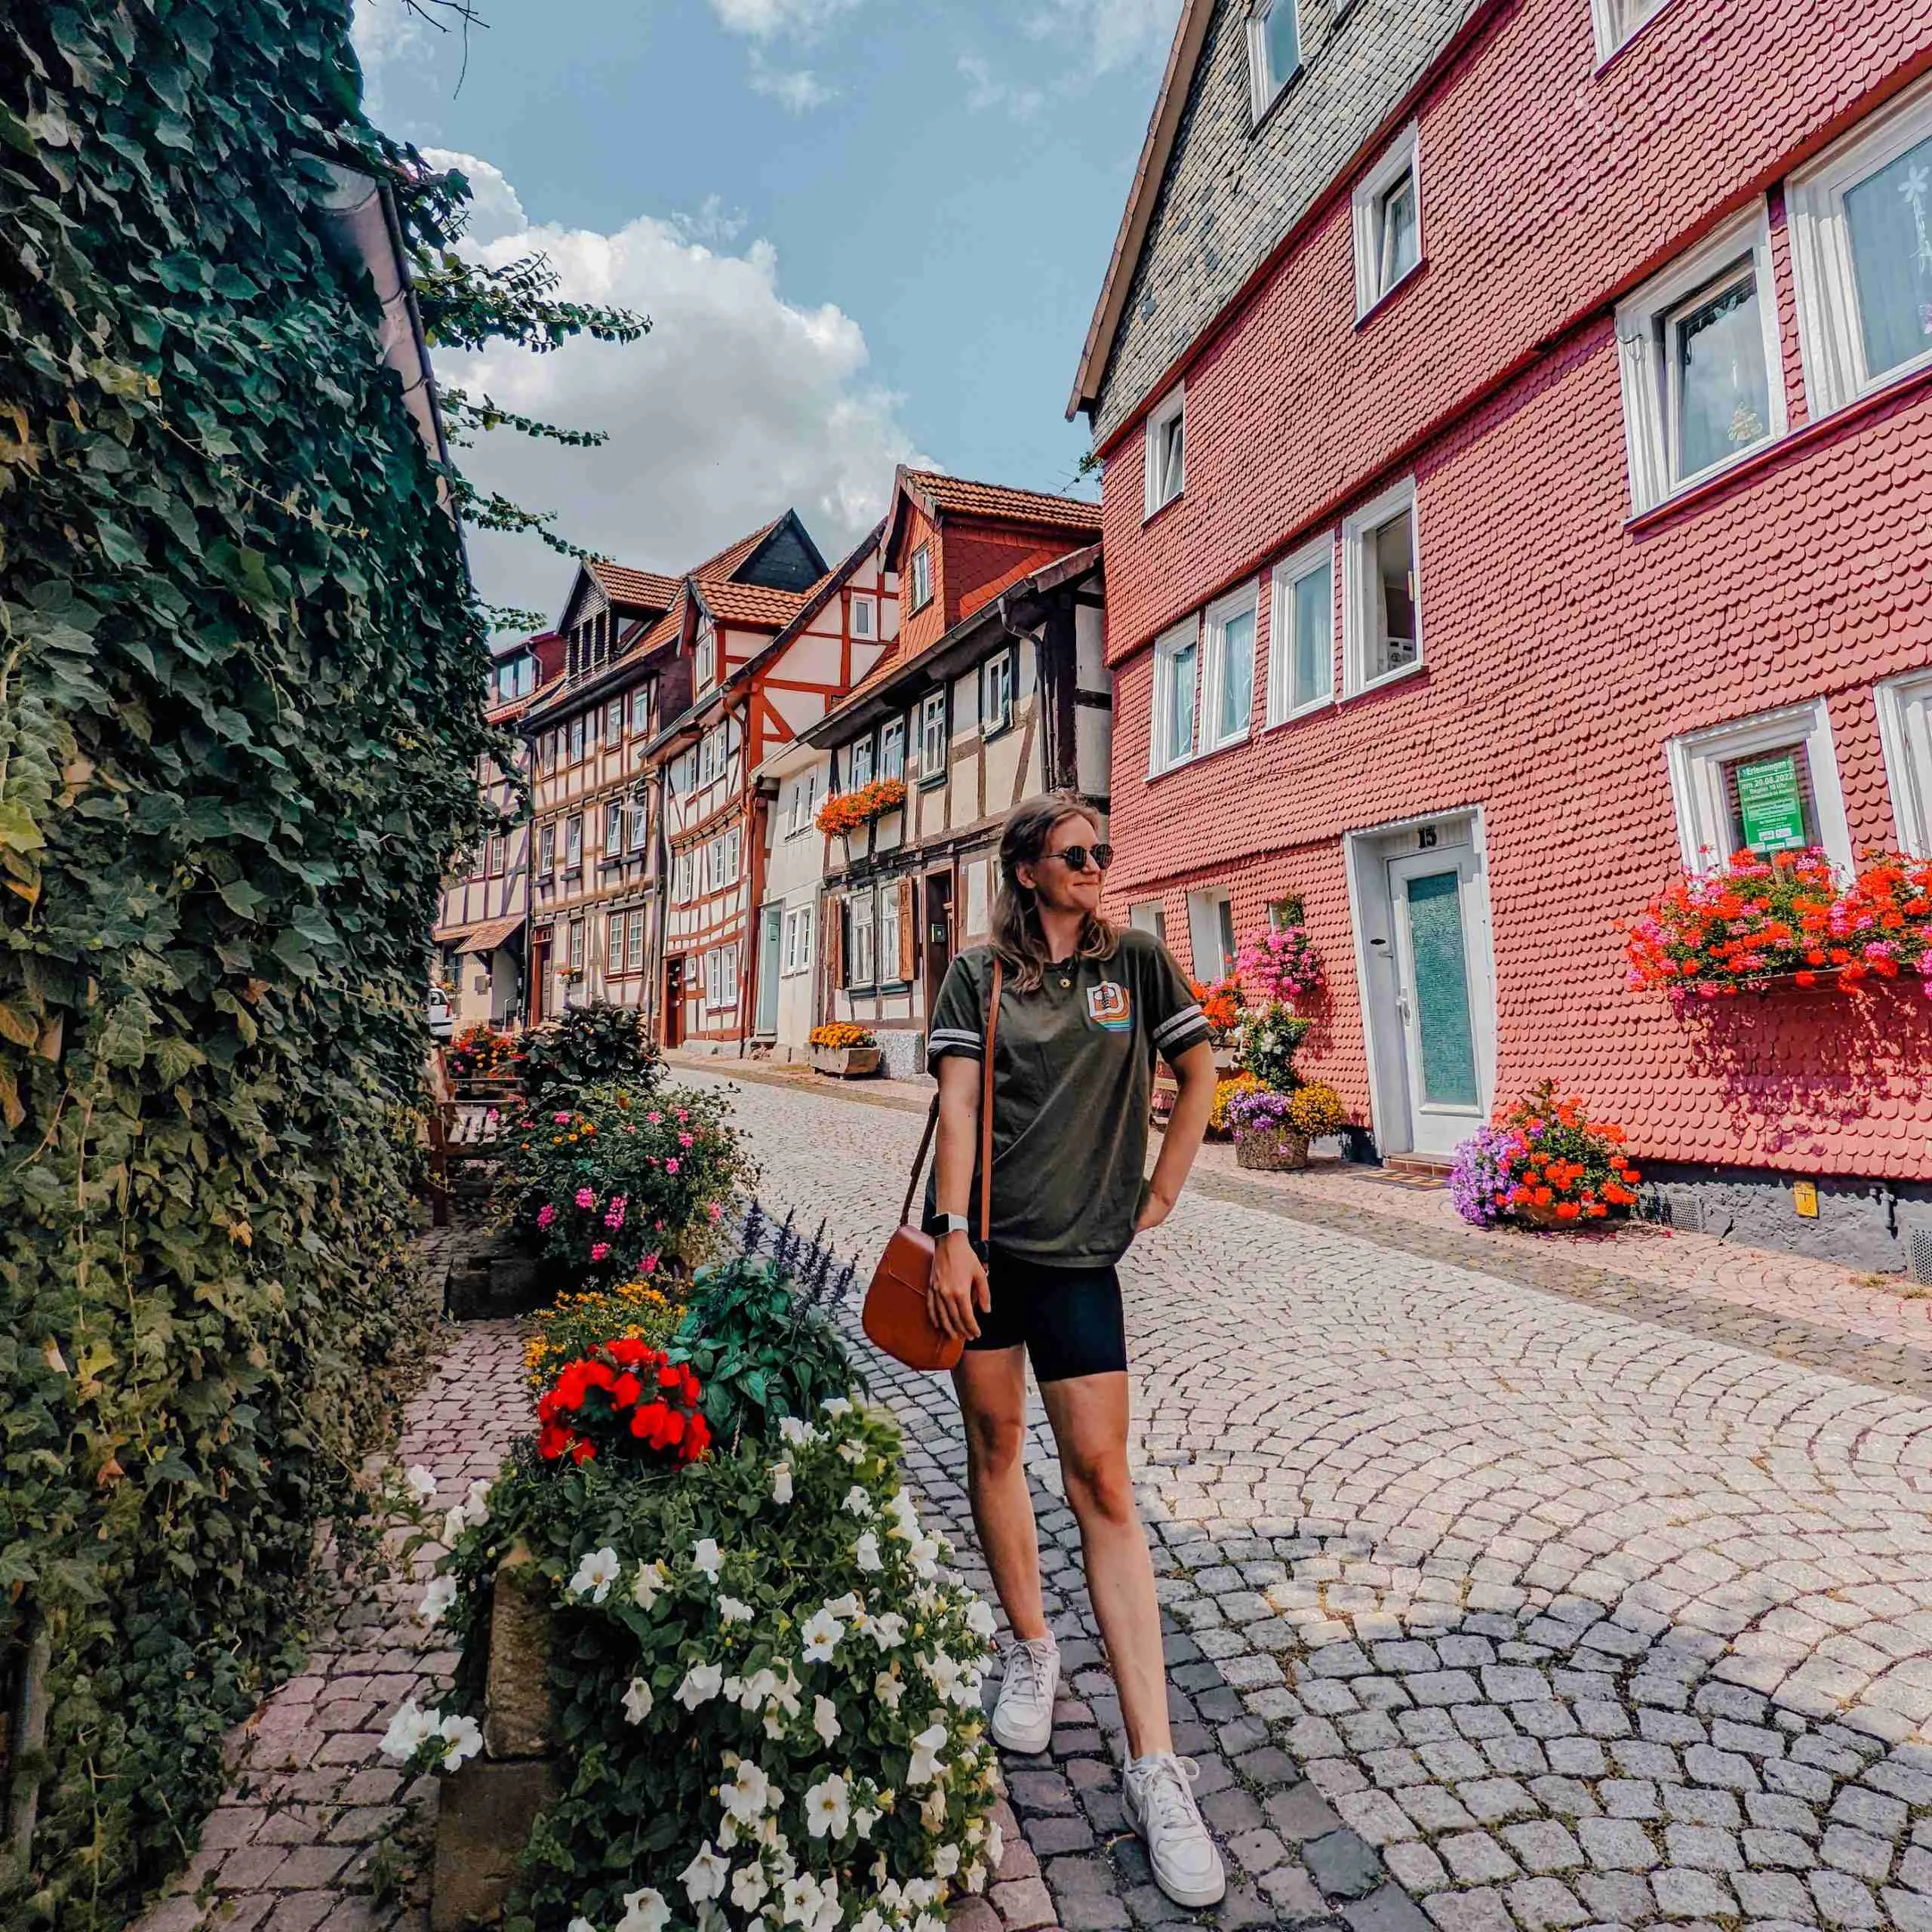 The colourful, timber framed streets of a small town in Germany, one of my summer holidays 